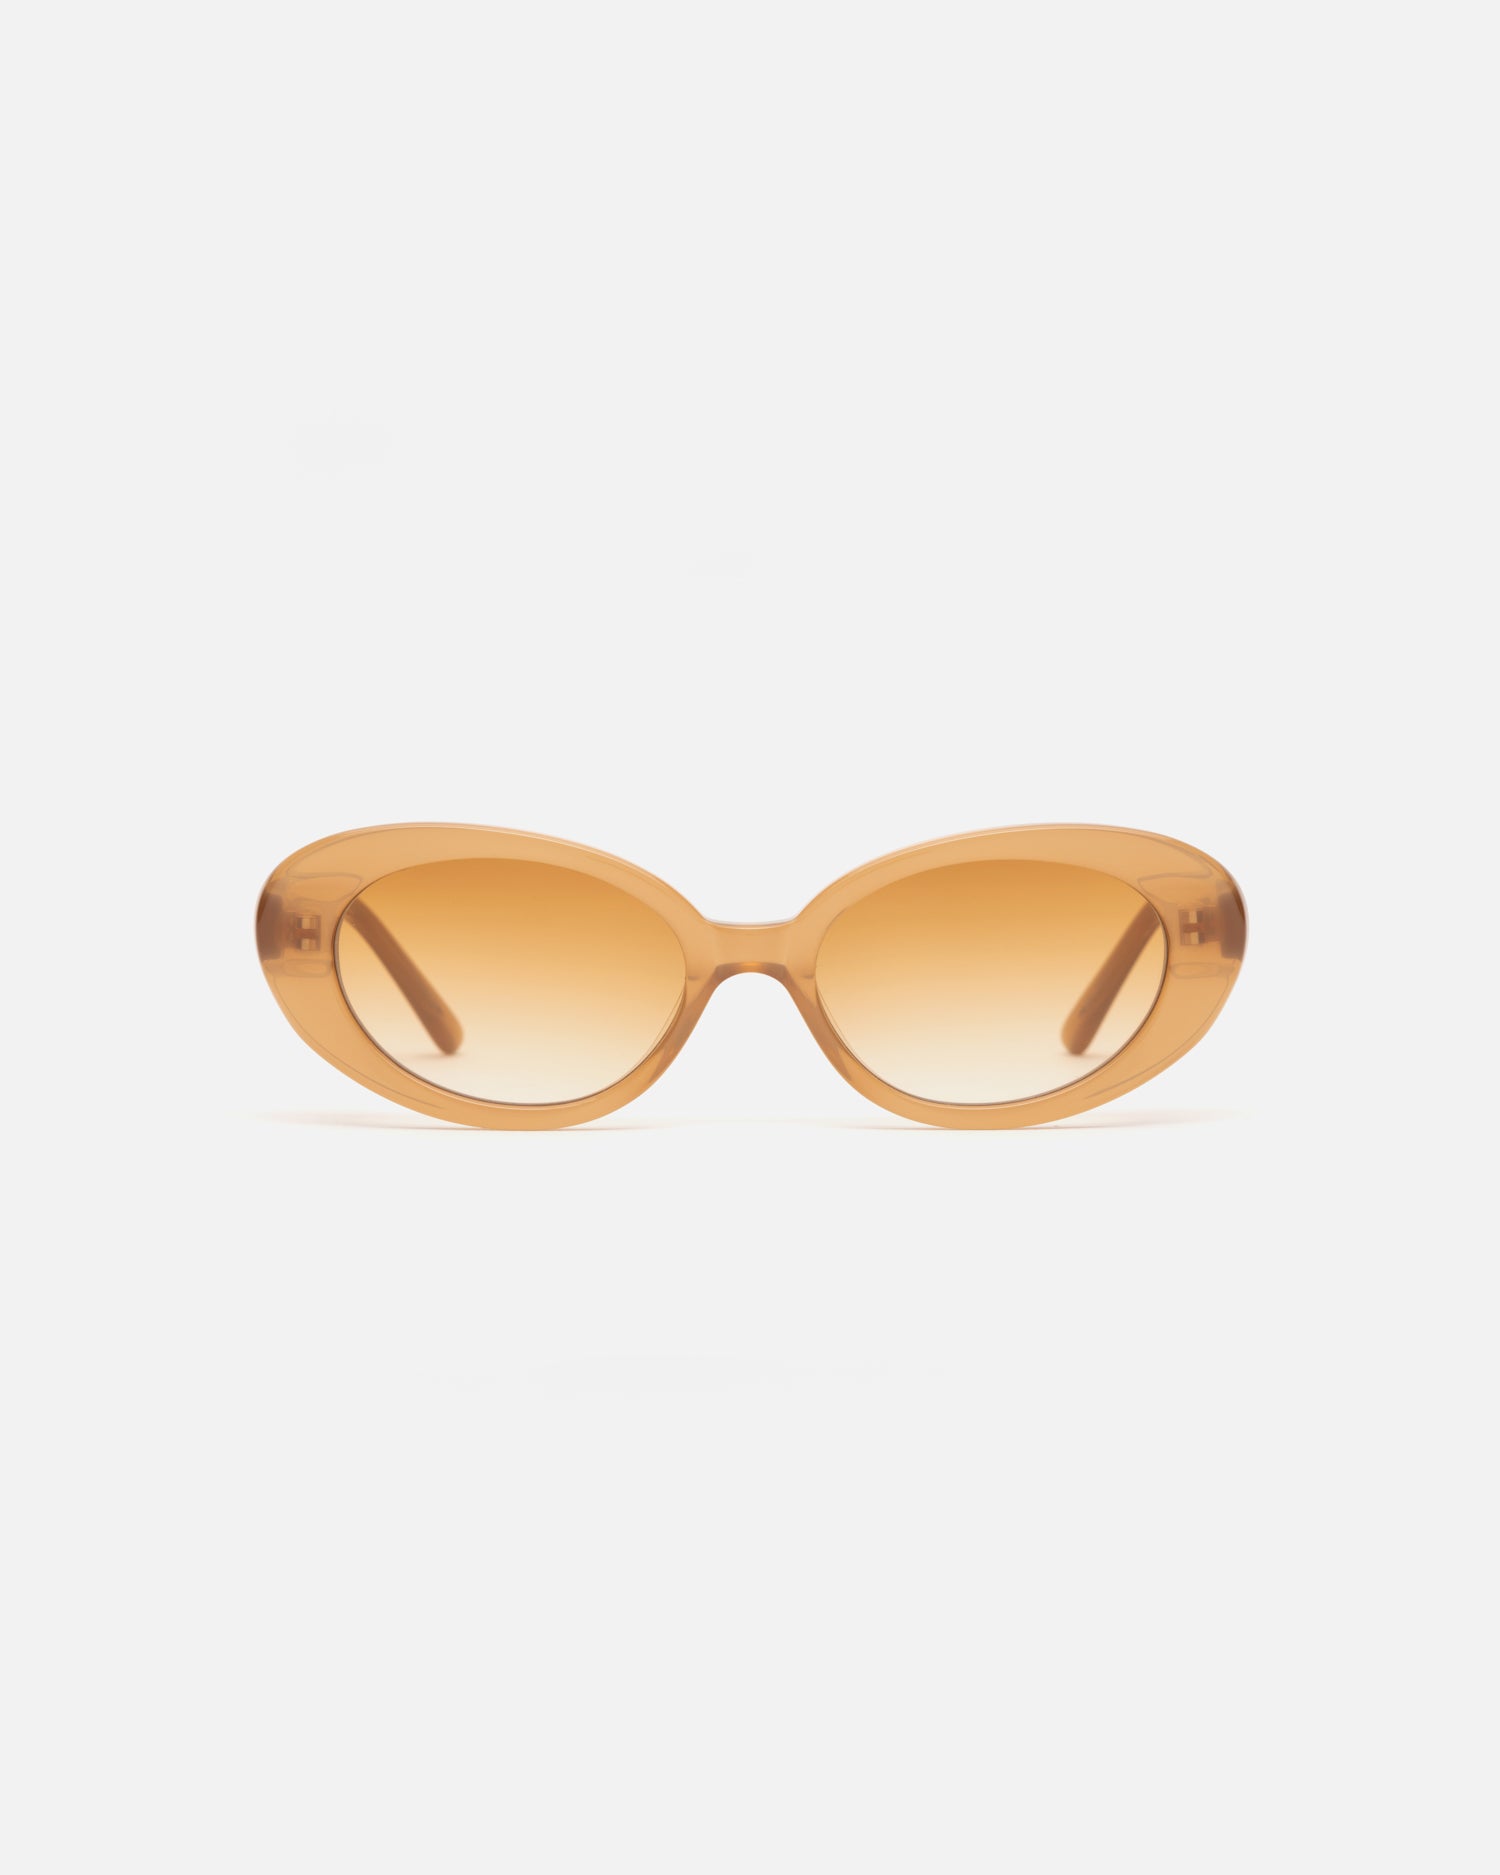 Lu Goldie Jeanne round Sunglasses in caramel beige acetate with caramel gradient lenses, front image